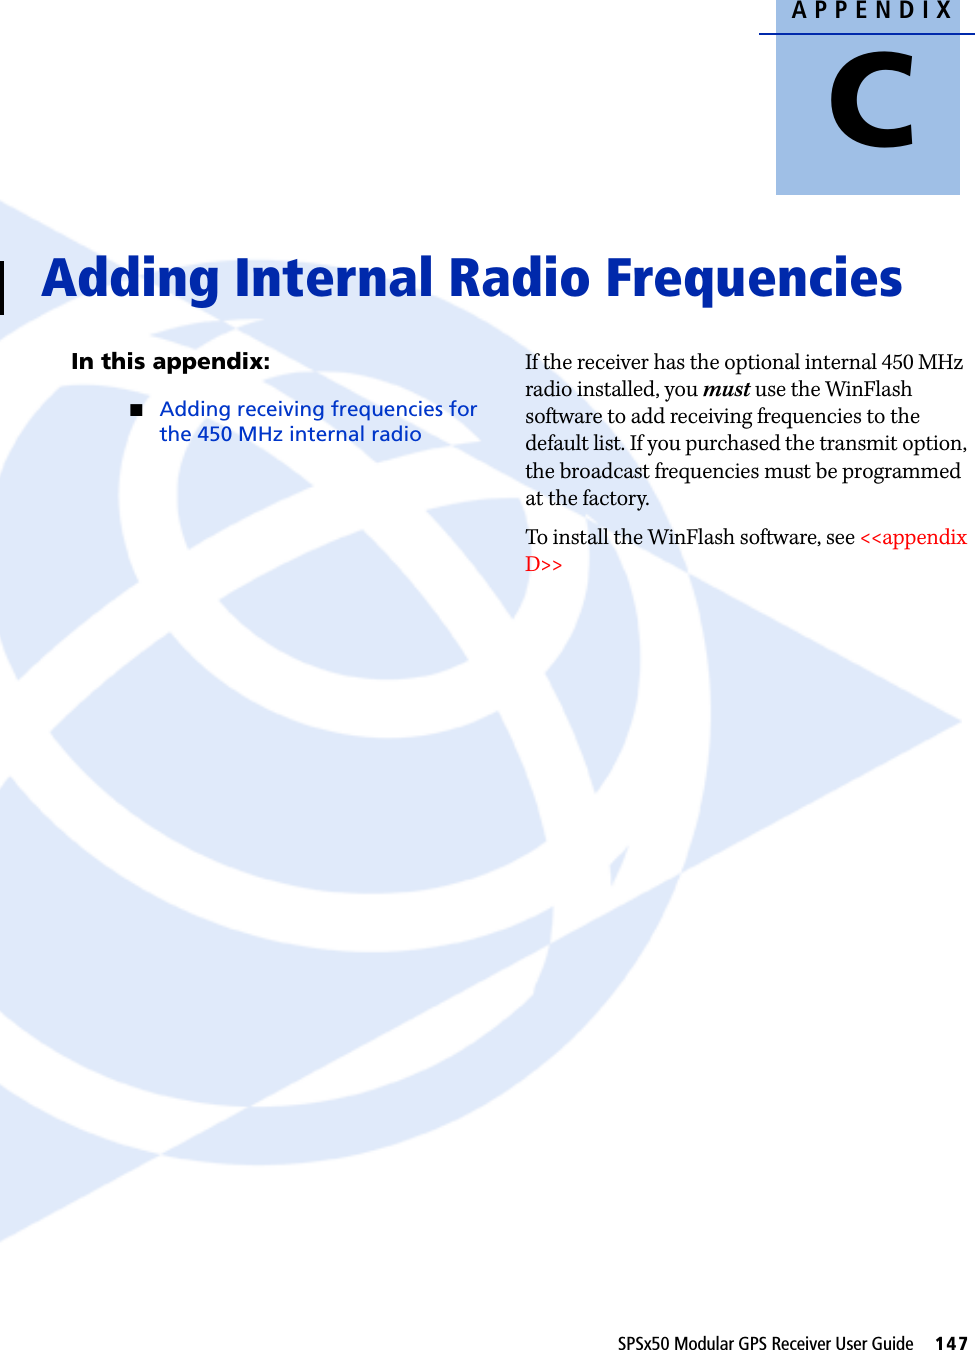 APPENDIXCSPSx50 Modular GPS Receiver User Guide     147Adding Internal Radio Frequencies CIn this appendix:QAdding receiving frequencies for the 450 MHz internal radioIf the receiver has the optional internal 450 MHz radio installed, you must use the WinFlash software to add receiving frequencies to the default list. If you purchased the transmit option, the broadcast frequencies must be programmed at the factory. To install the WinFlash software, see &lt;&lt;appendix D&gt;&gt;